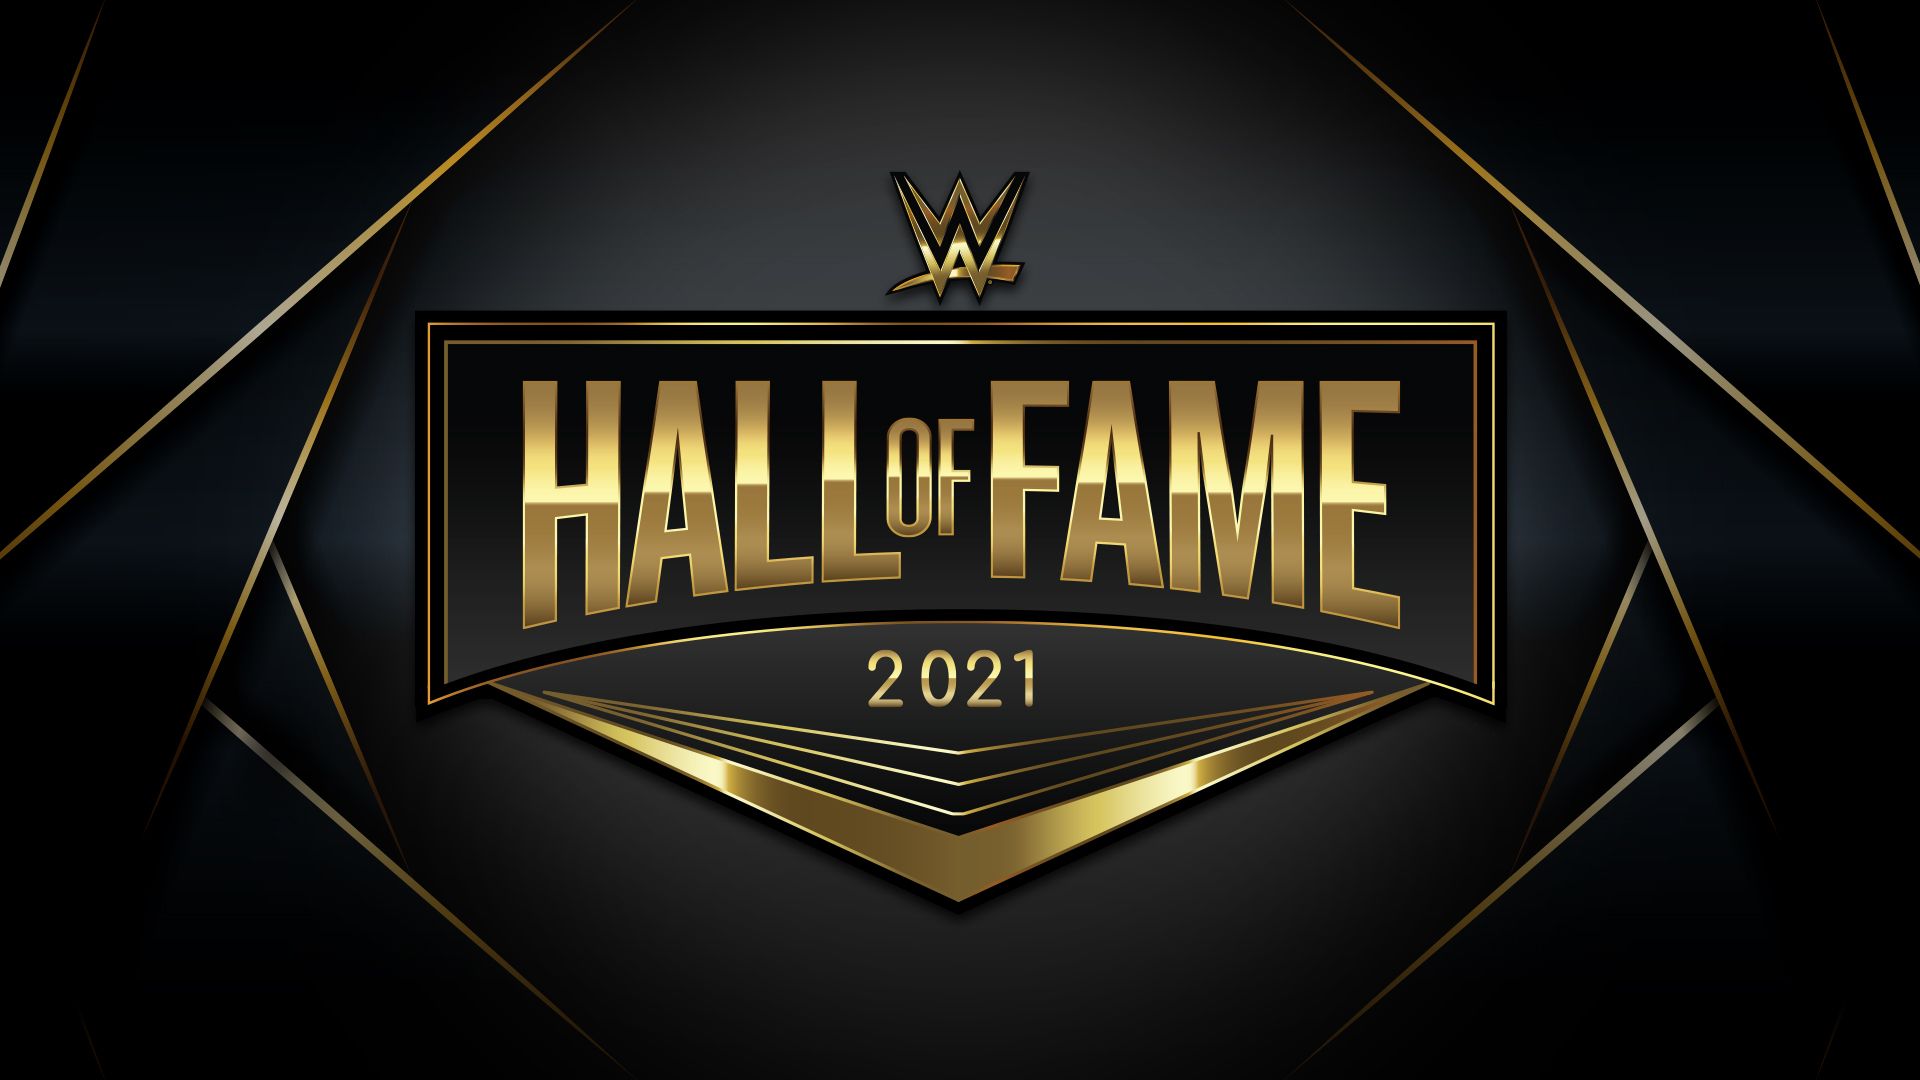 The 2021 WWE Hall Of Fame Host Revealed, The Bella Twins Tape Their Inductions